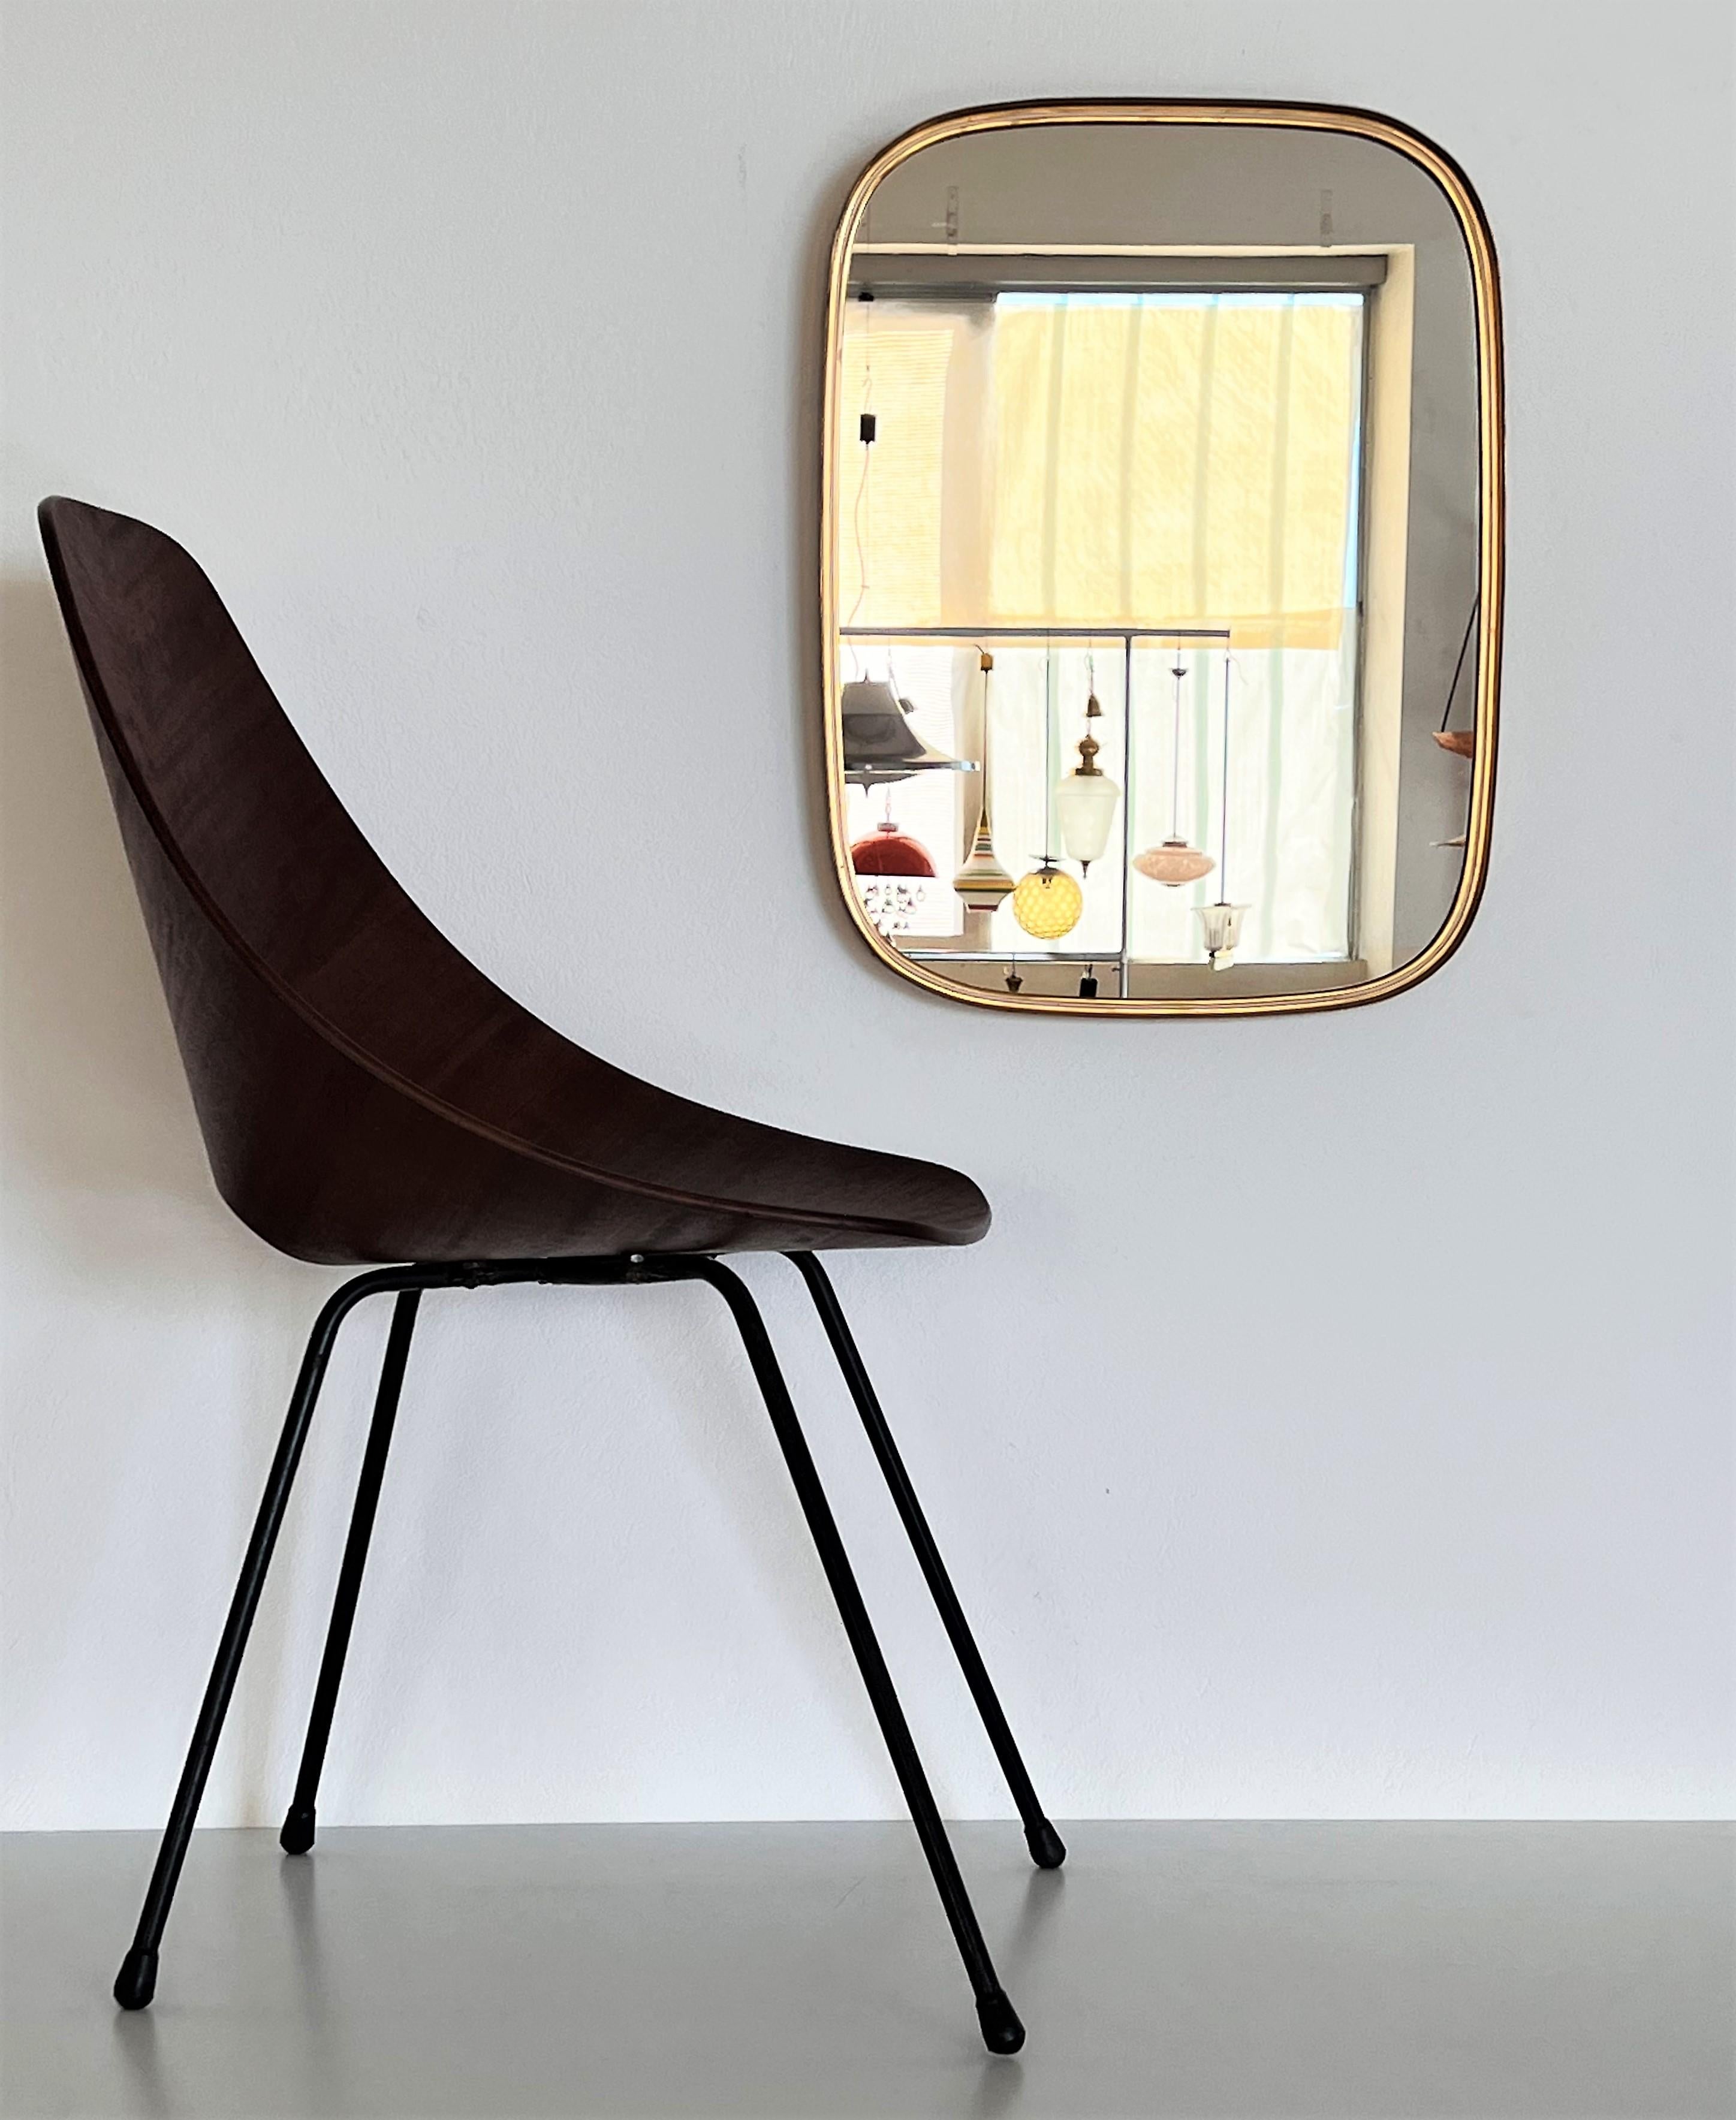 Beautiful and elegant rectangular curved wall mirror made of full polished brass.
Made by Vereinigte Werkstätten München in the 1970s.
The brass frame is of high level of craftsmanship, with small creamy-off white line inside the frame.
The mirror